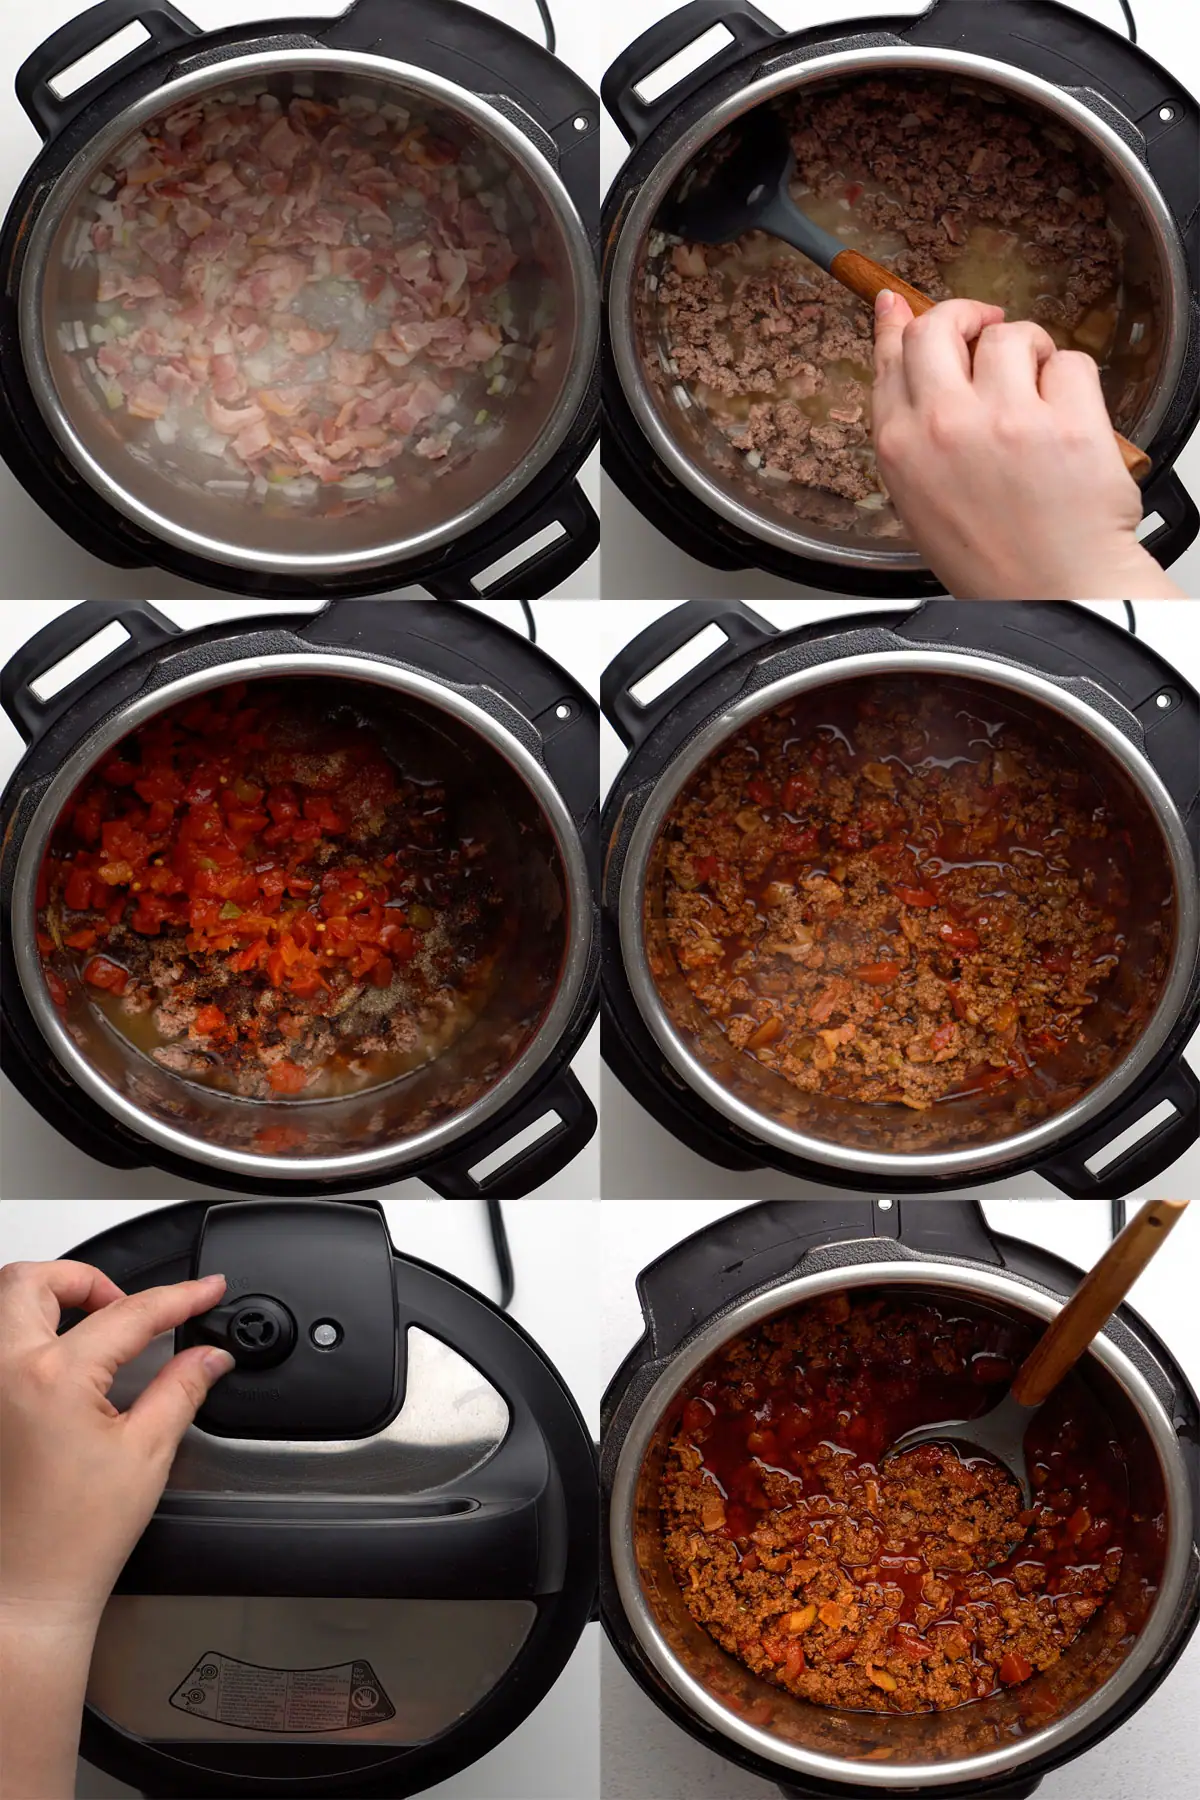 Step-by-step instructions for chili con carne recipe in Instant Pot (IP).